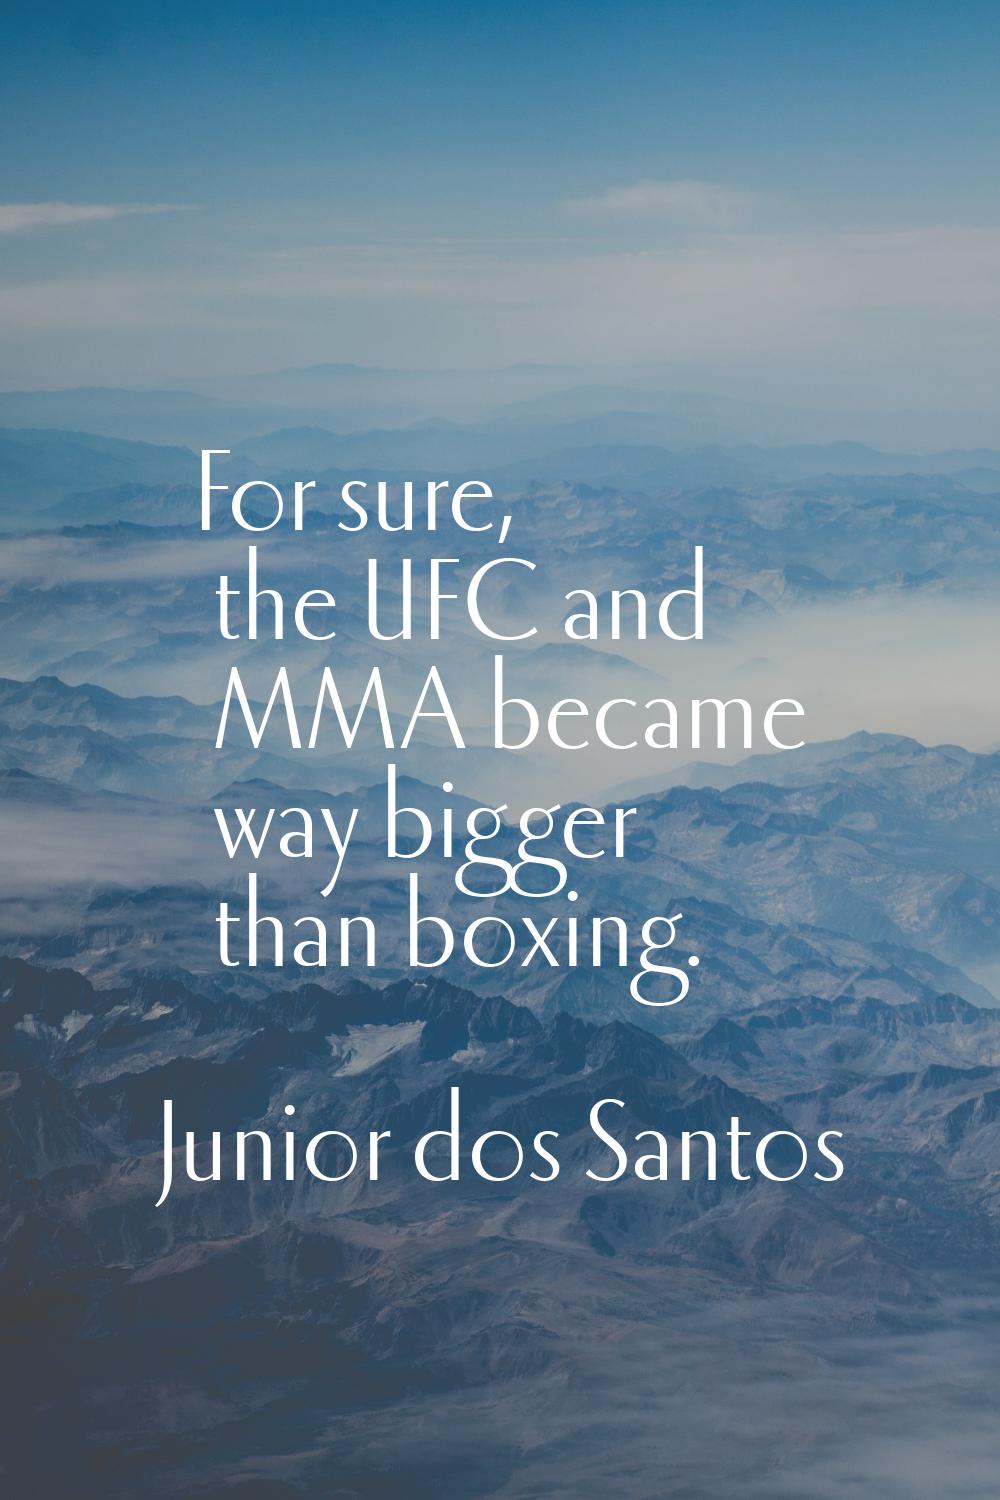 For sure, the UFC and MMA became way bigger than boxing.